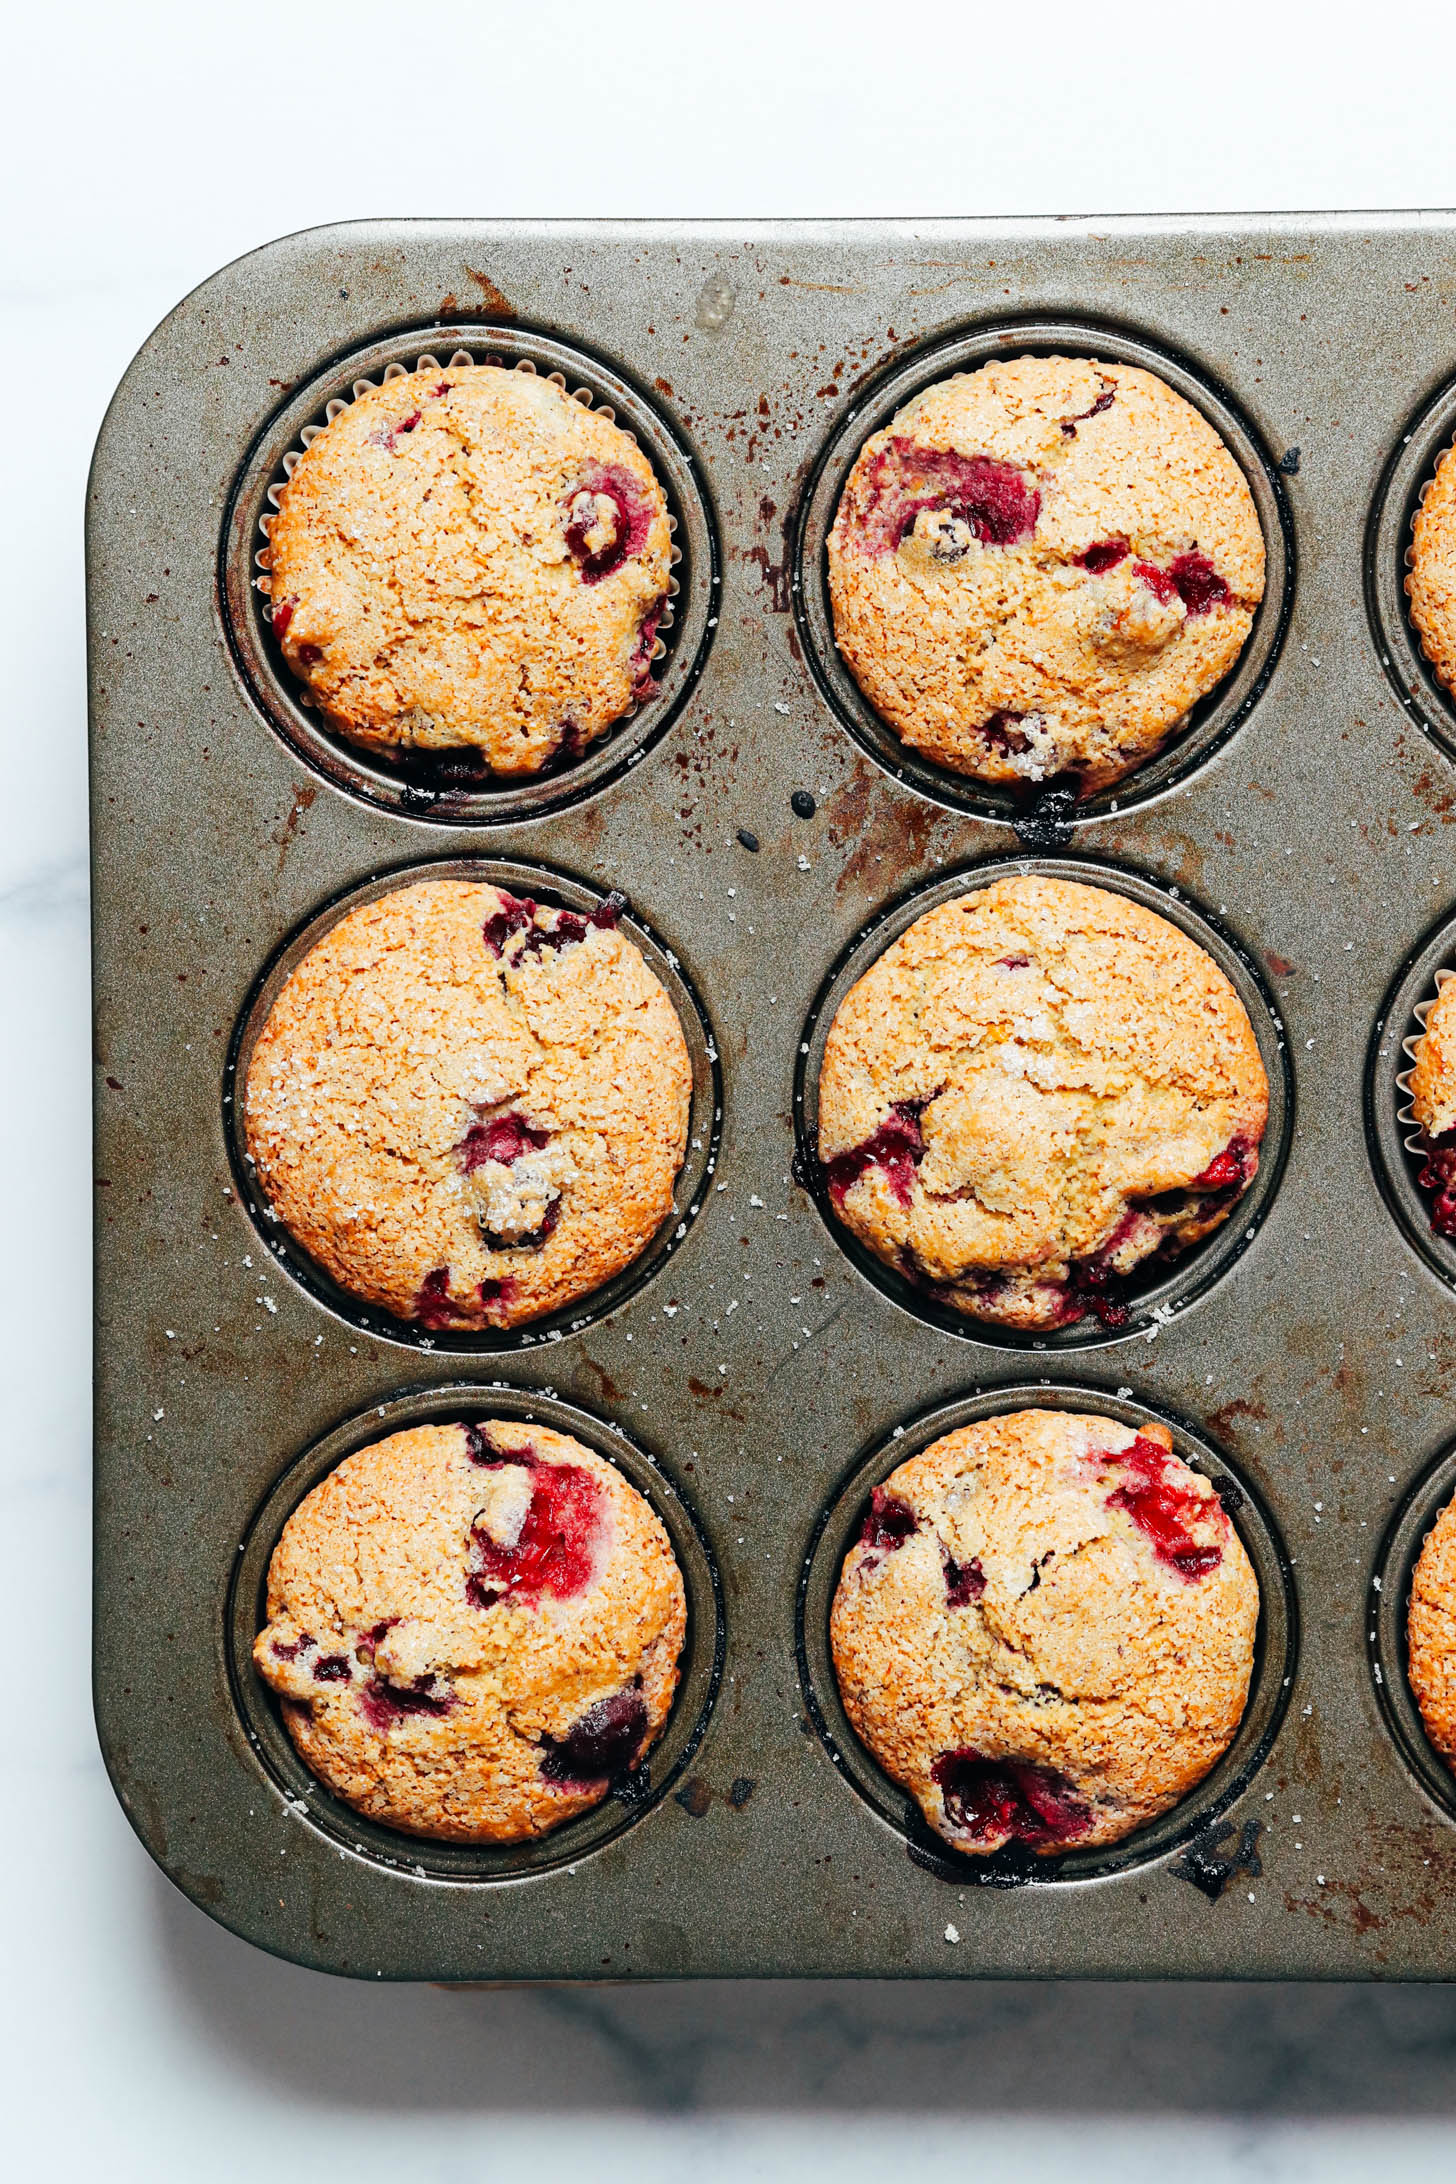 Top down shot of freshly baked vegan gluten-free cranberry orange muffins in a muffin tin